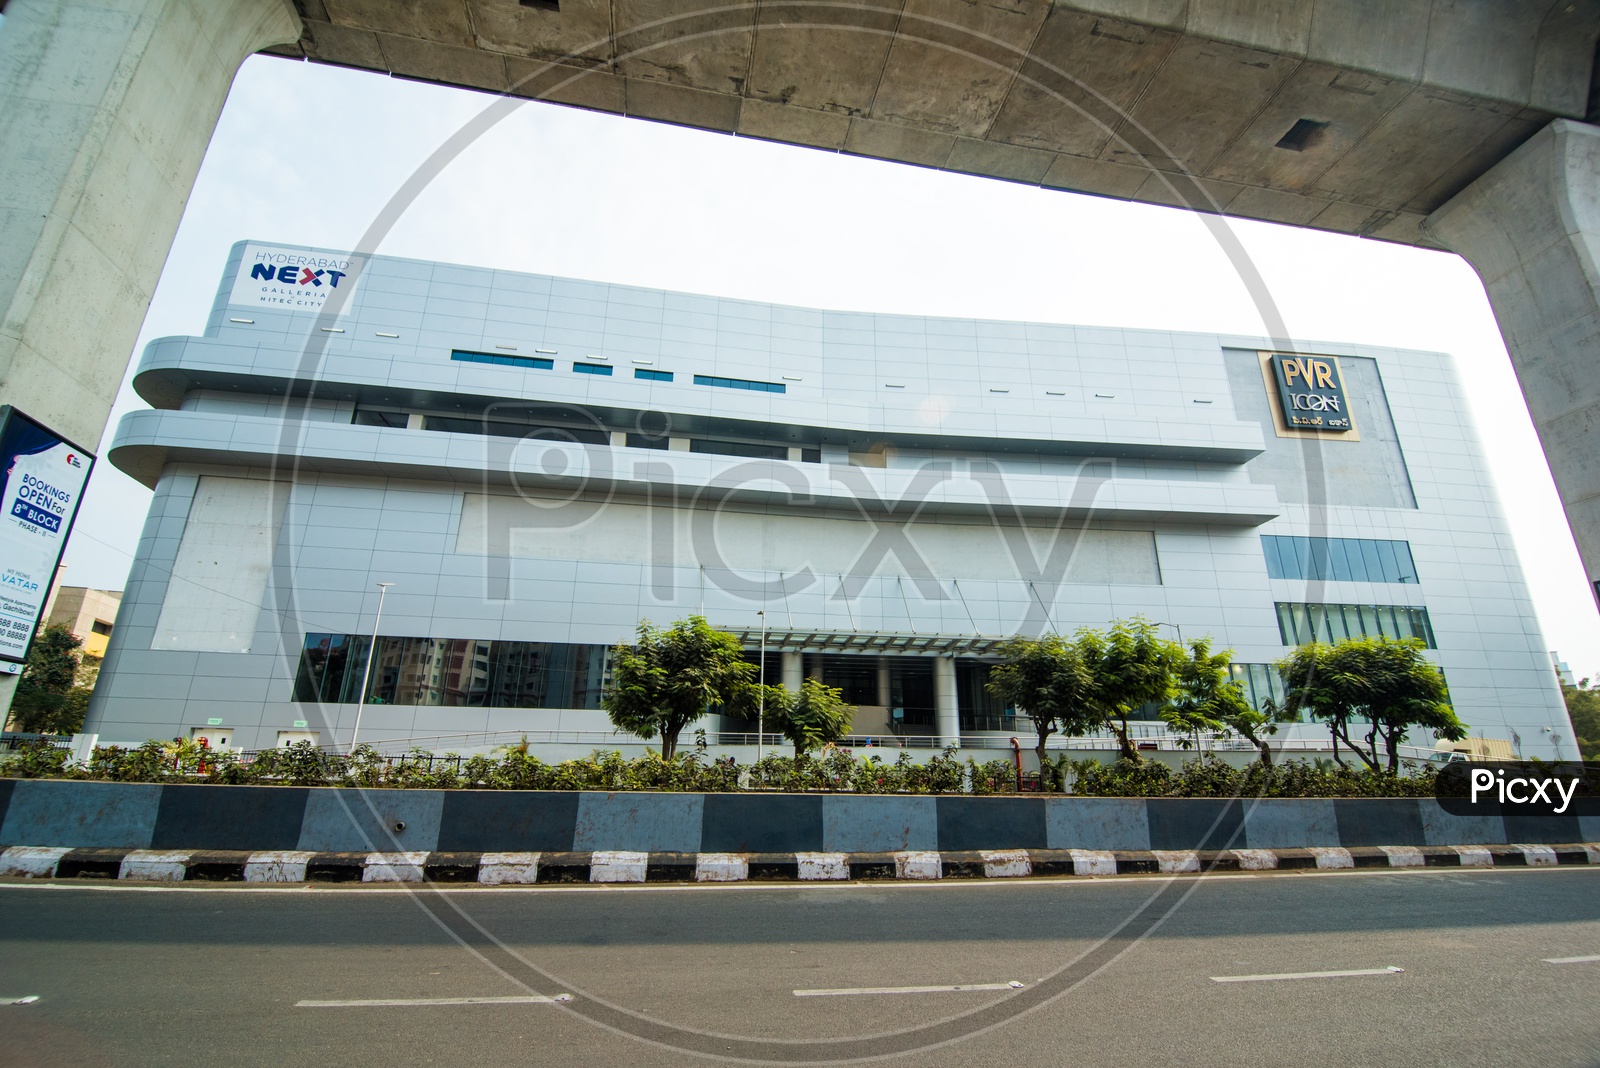 PVR Mall and Multiplex